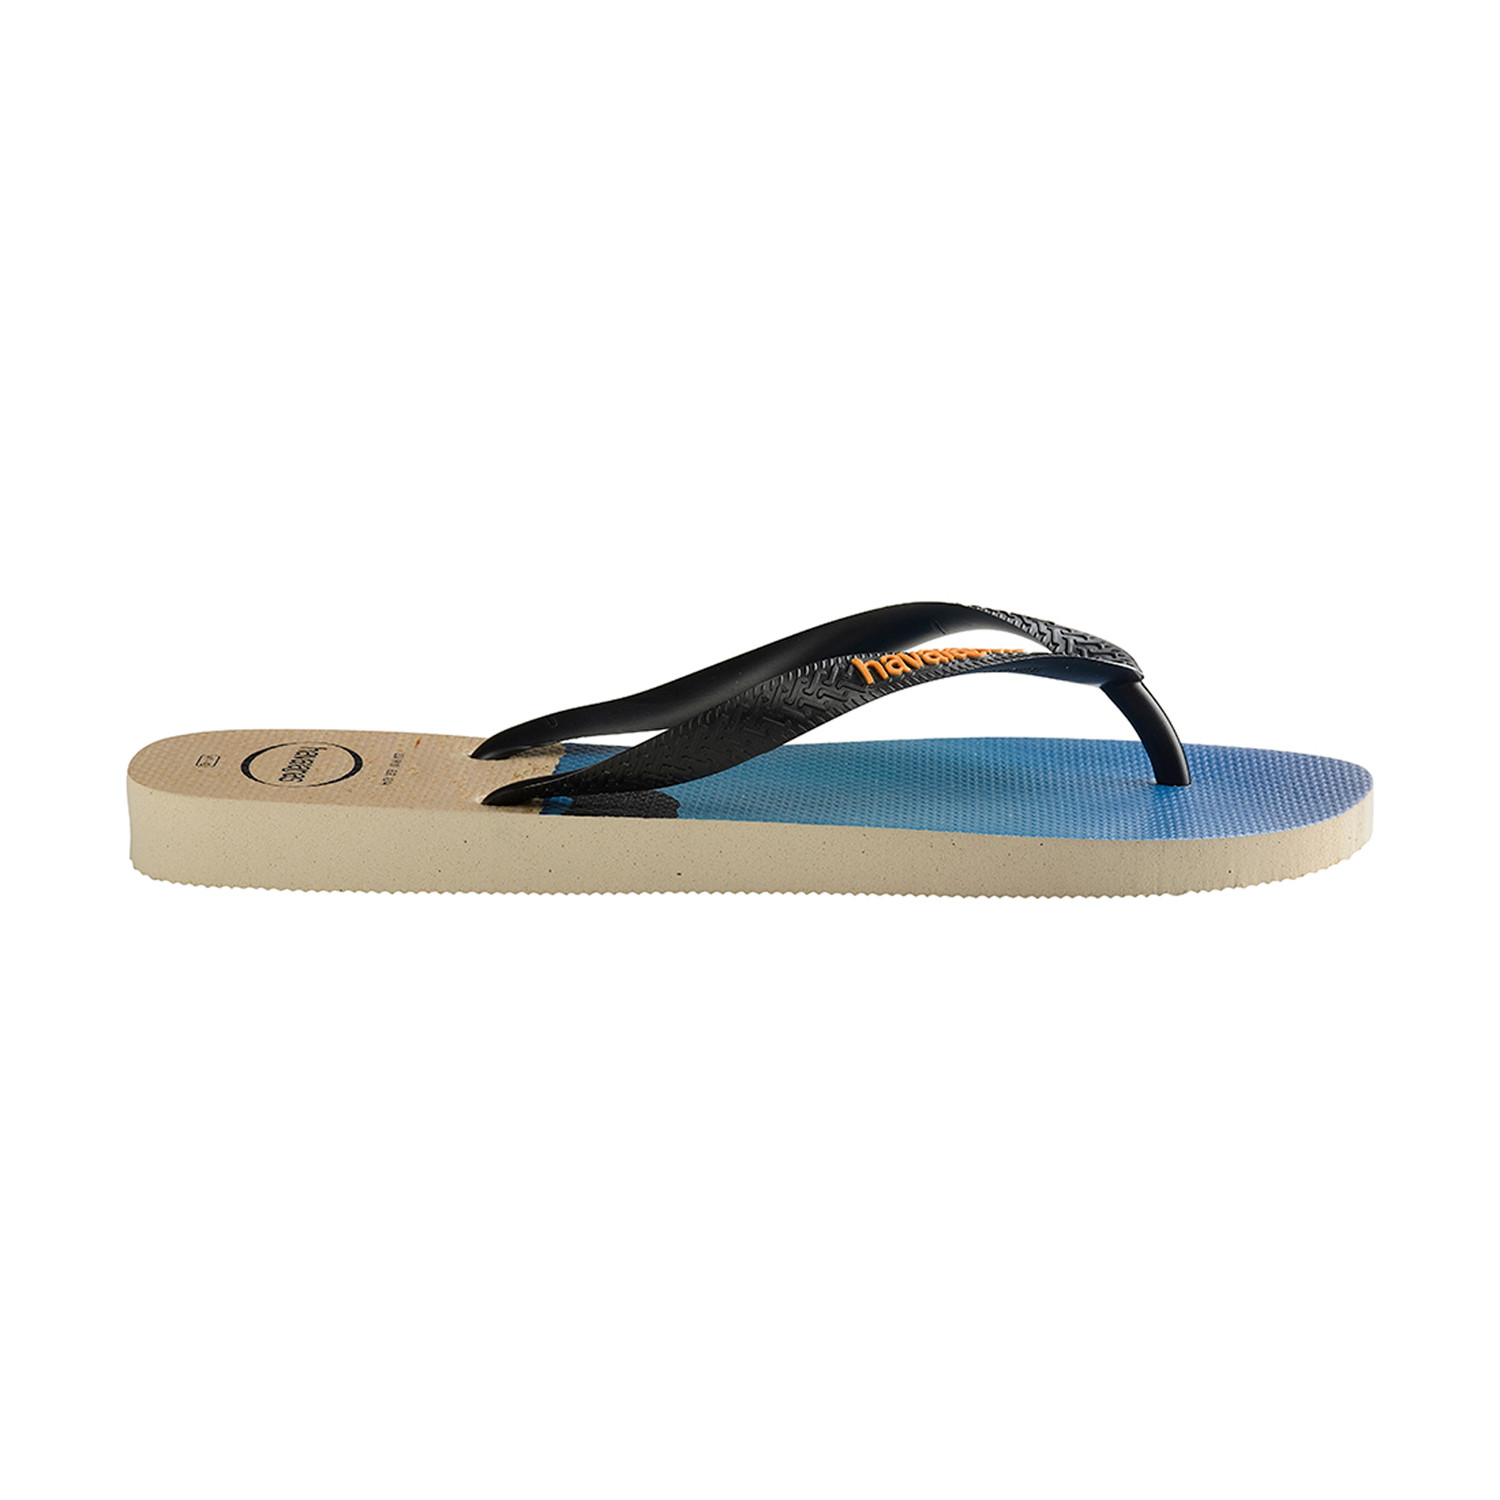 Hype Sandal // Beige (US: 8) - Havaianas - Touch of Modern